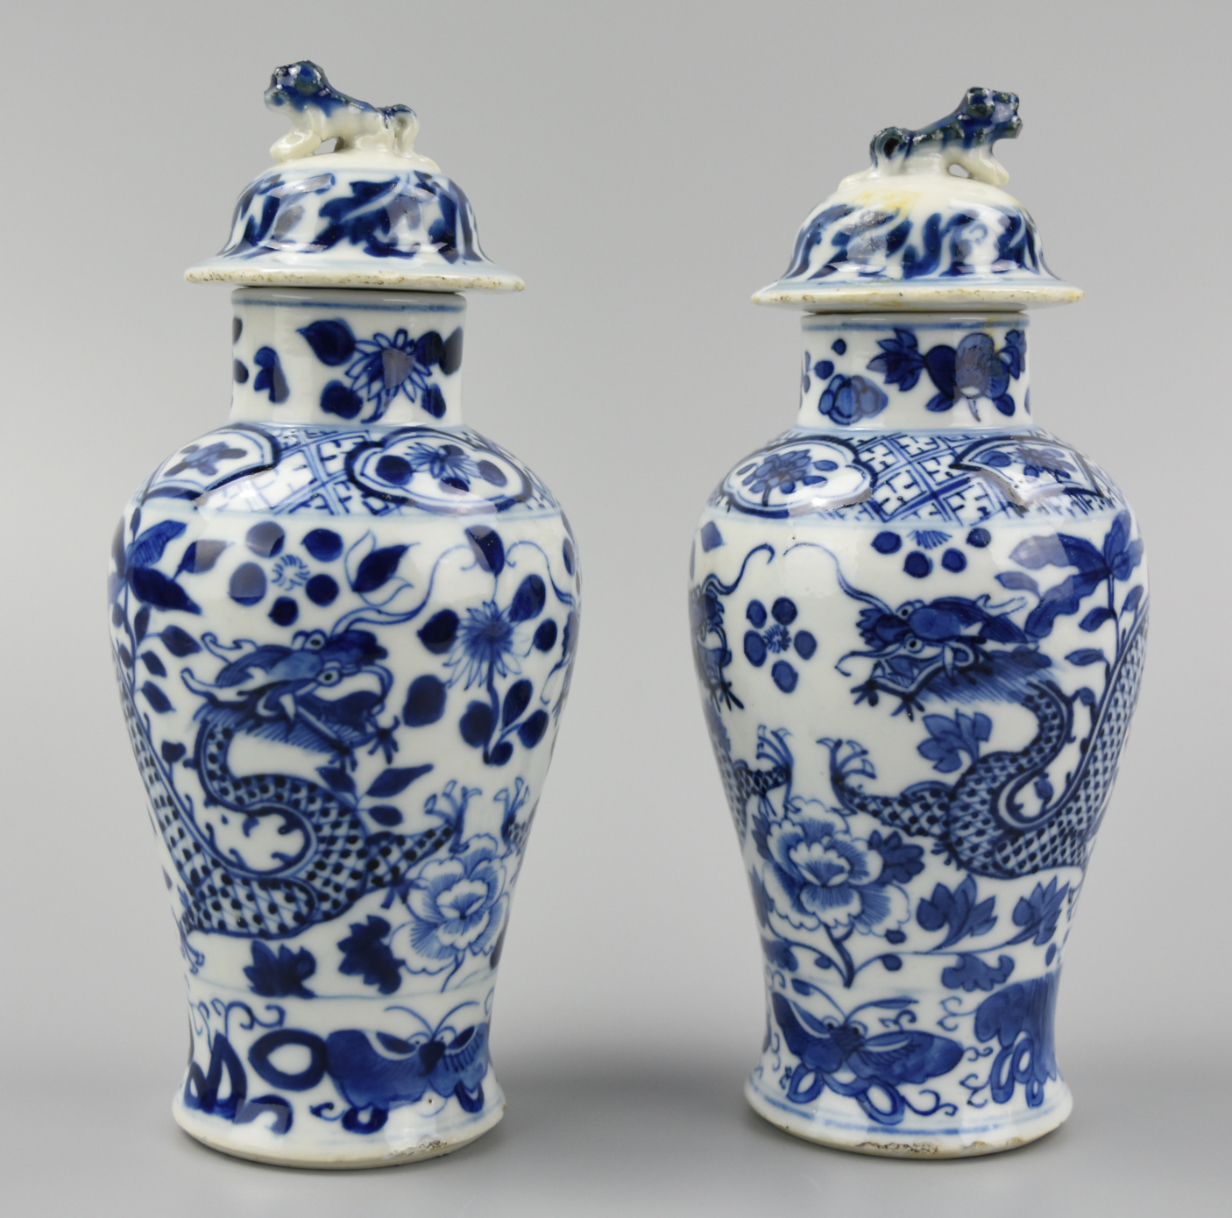 PAIR OF CHINESE B&W DRAGON VASES